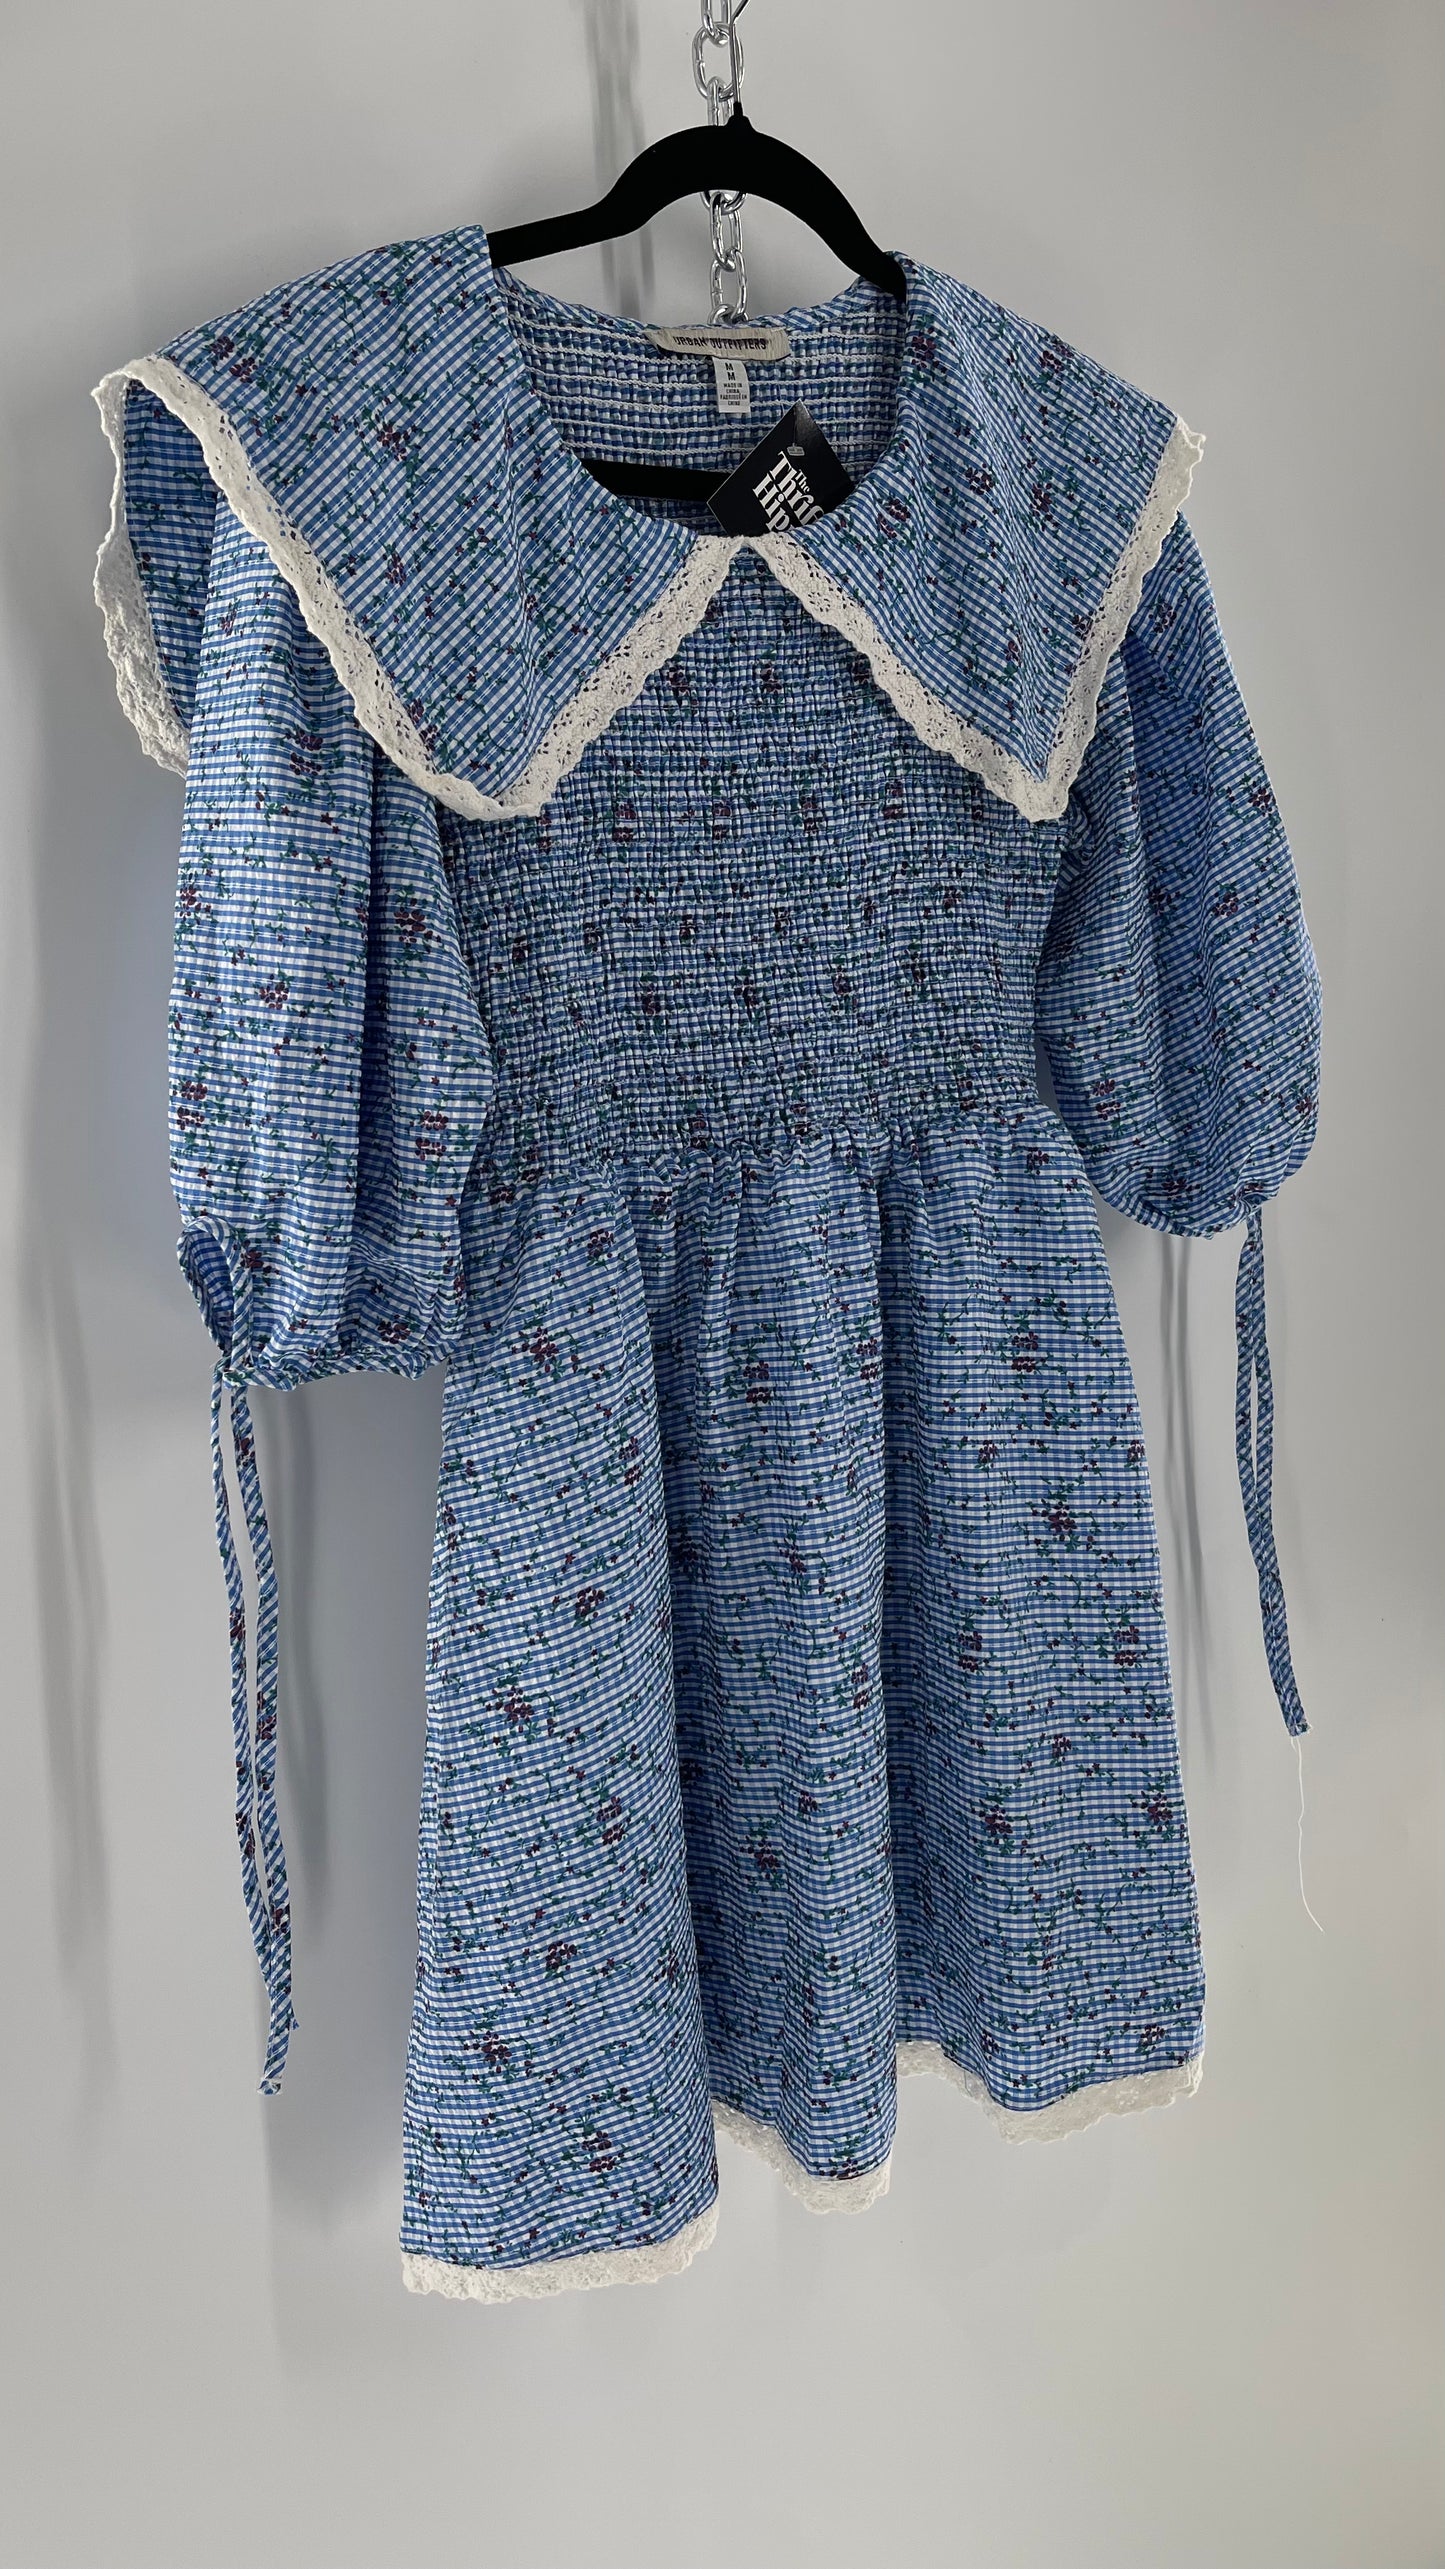 Urban Outfitters Blue Gingham Babydoll Dress with Lace Trim Collar and Smocked Bodice (Medium)